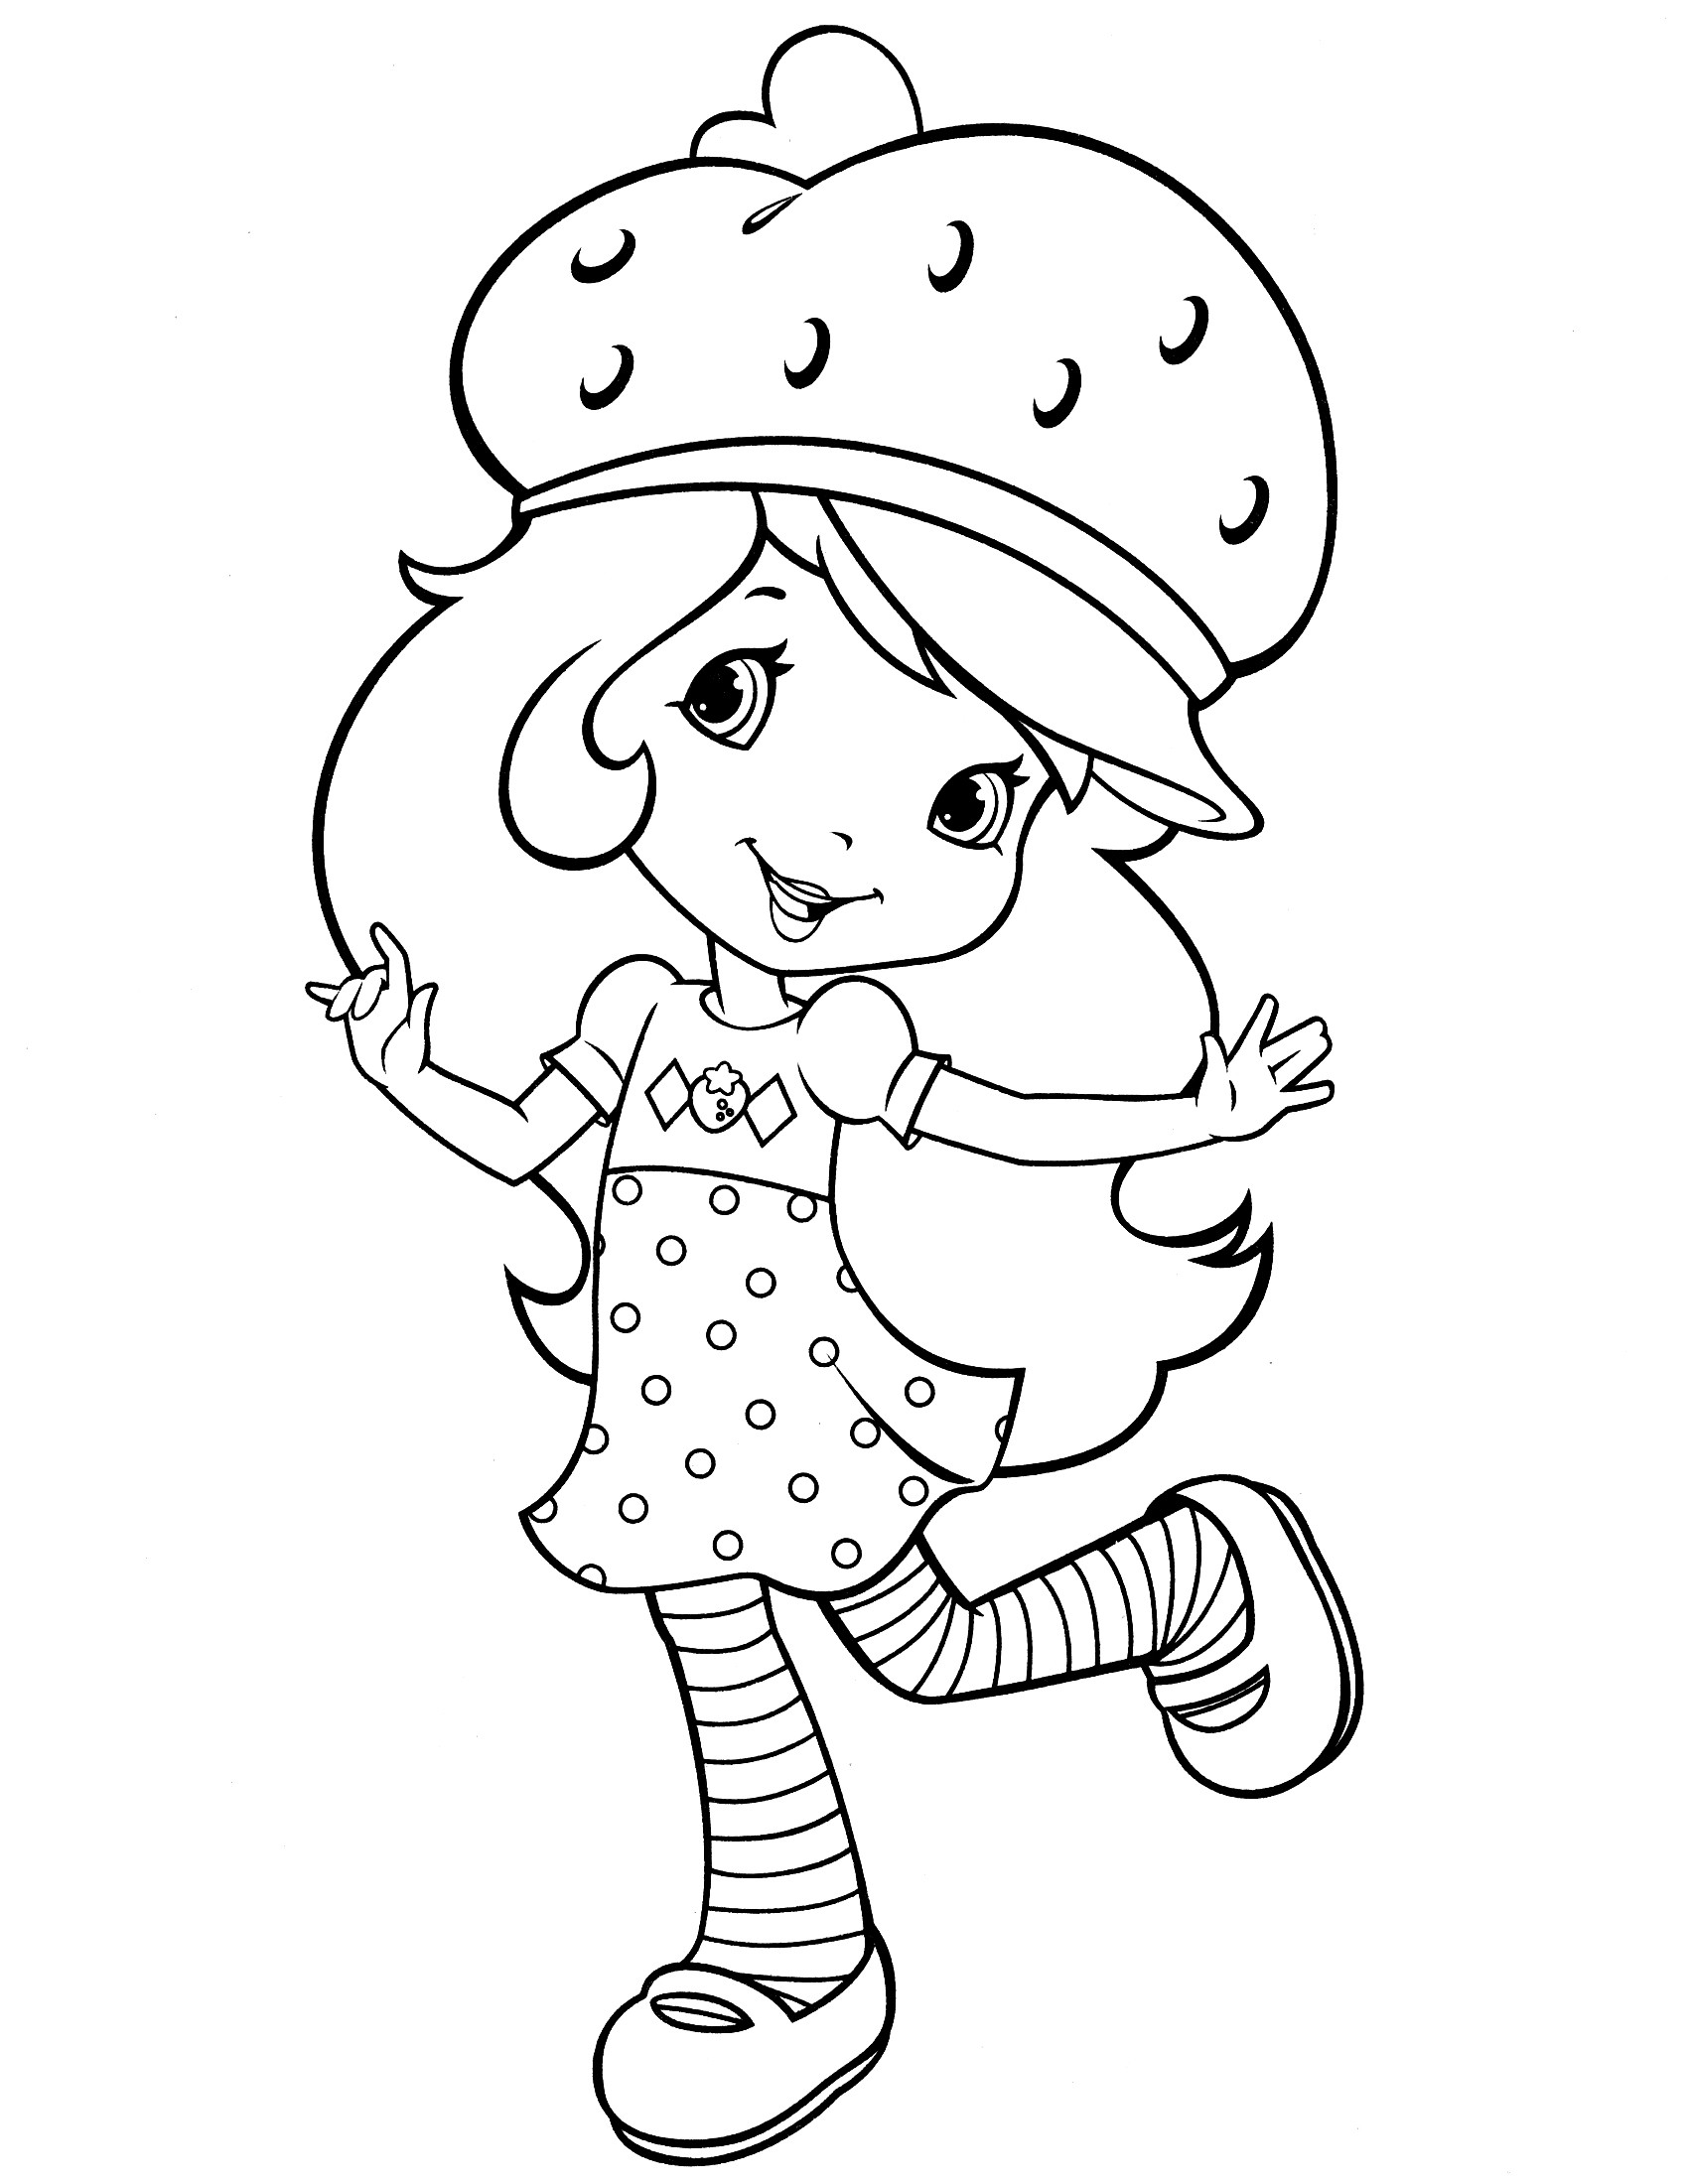 Strawberry Shortcake Printable Coloring Pages
 Strawberry Shortcake Coloring Pages